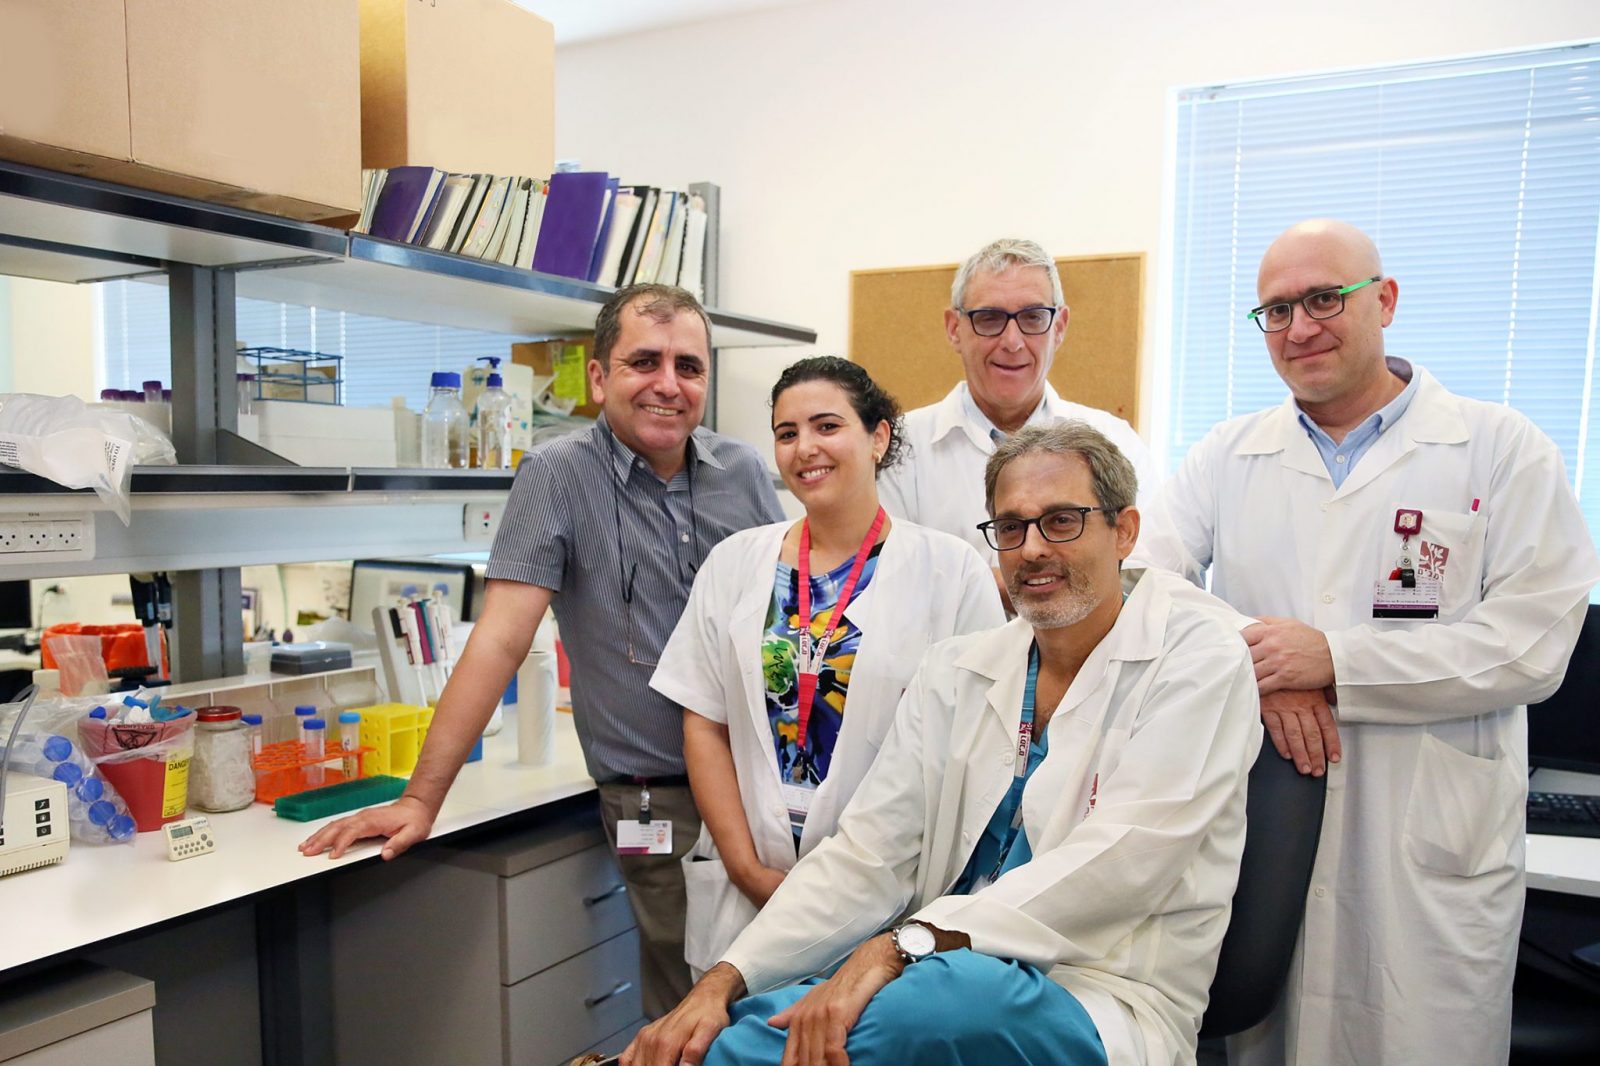 The Research Team (L-R): Top Row, Dr. Khatib, Professor Wiener, and Dr. Ginsburg; Bottom Row (L-R) Dr. Saadi and Professor Beloosesky. Photo Credit: Pioter Fliter